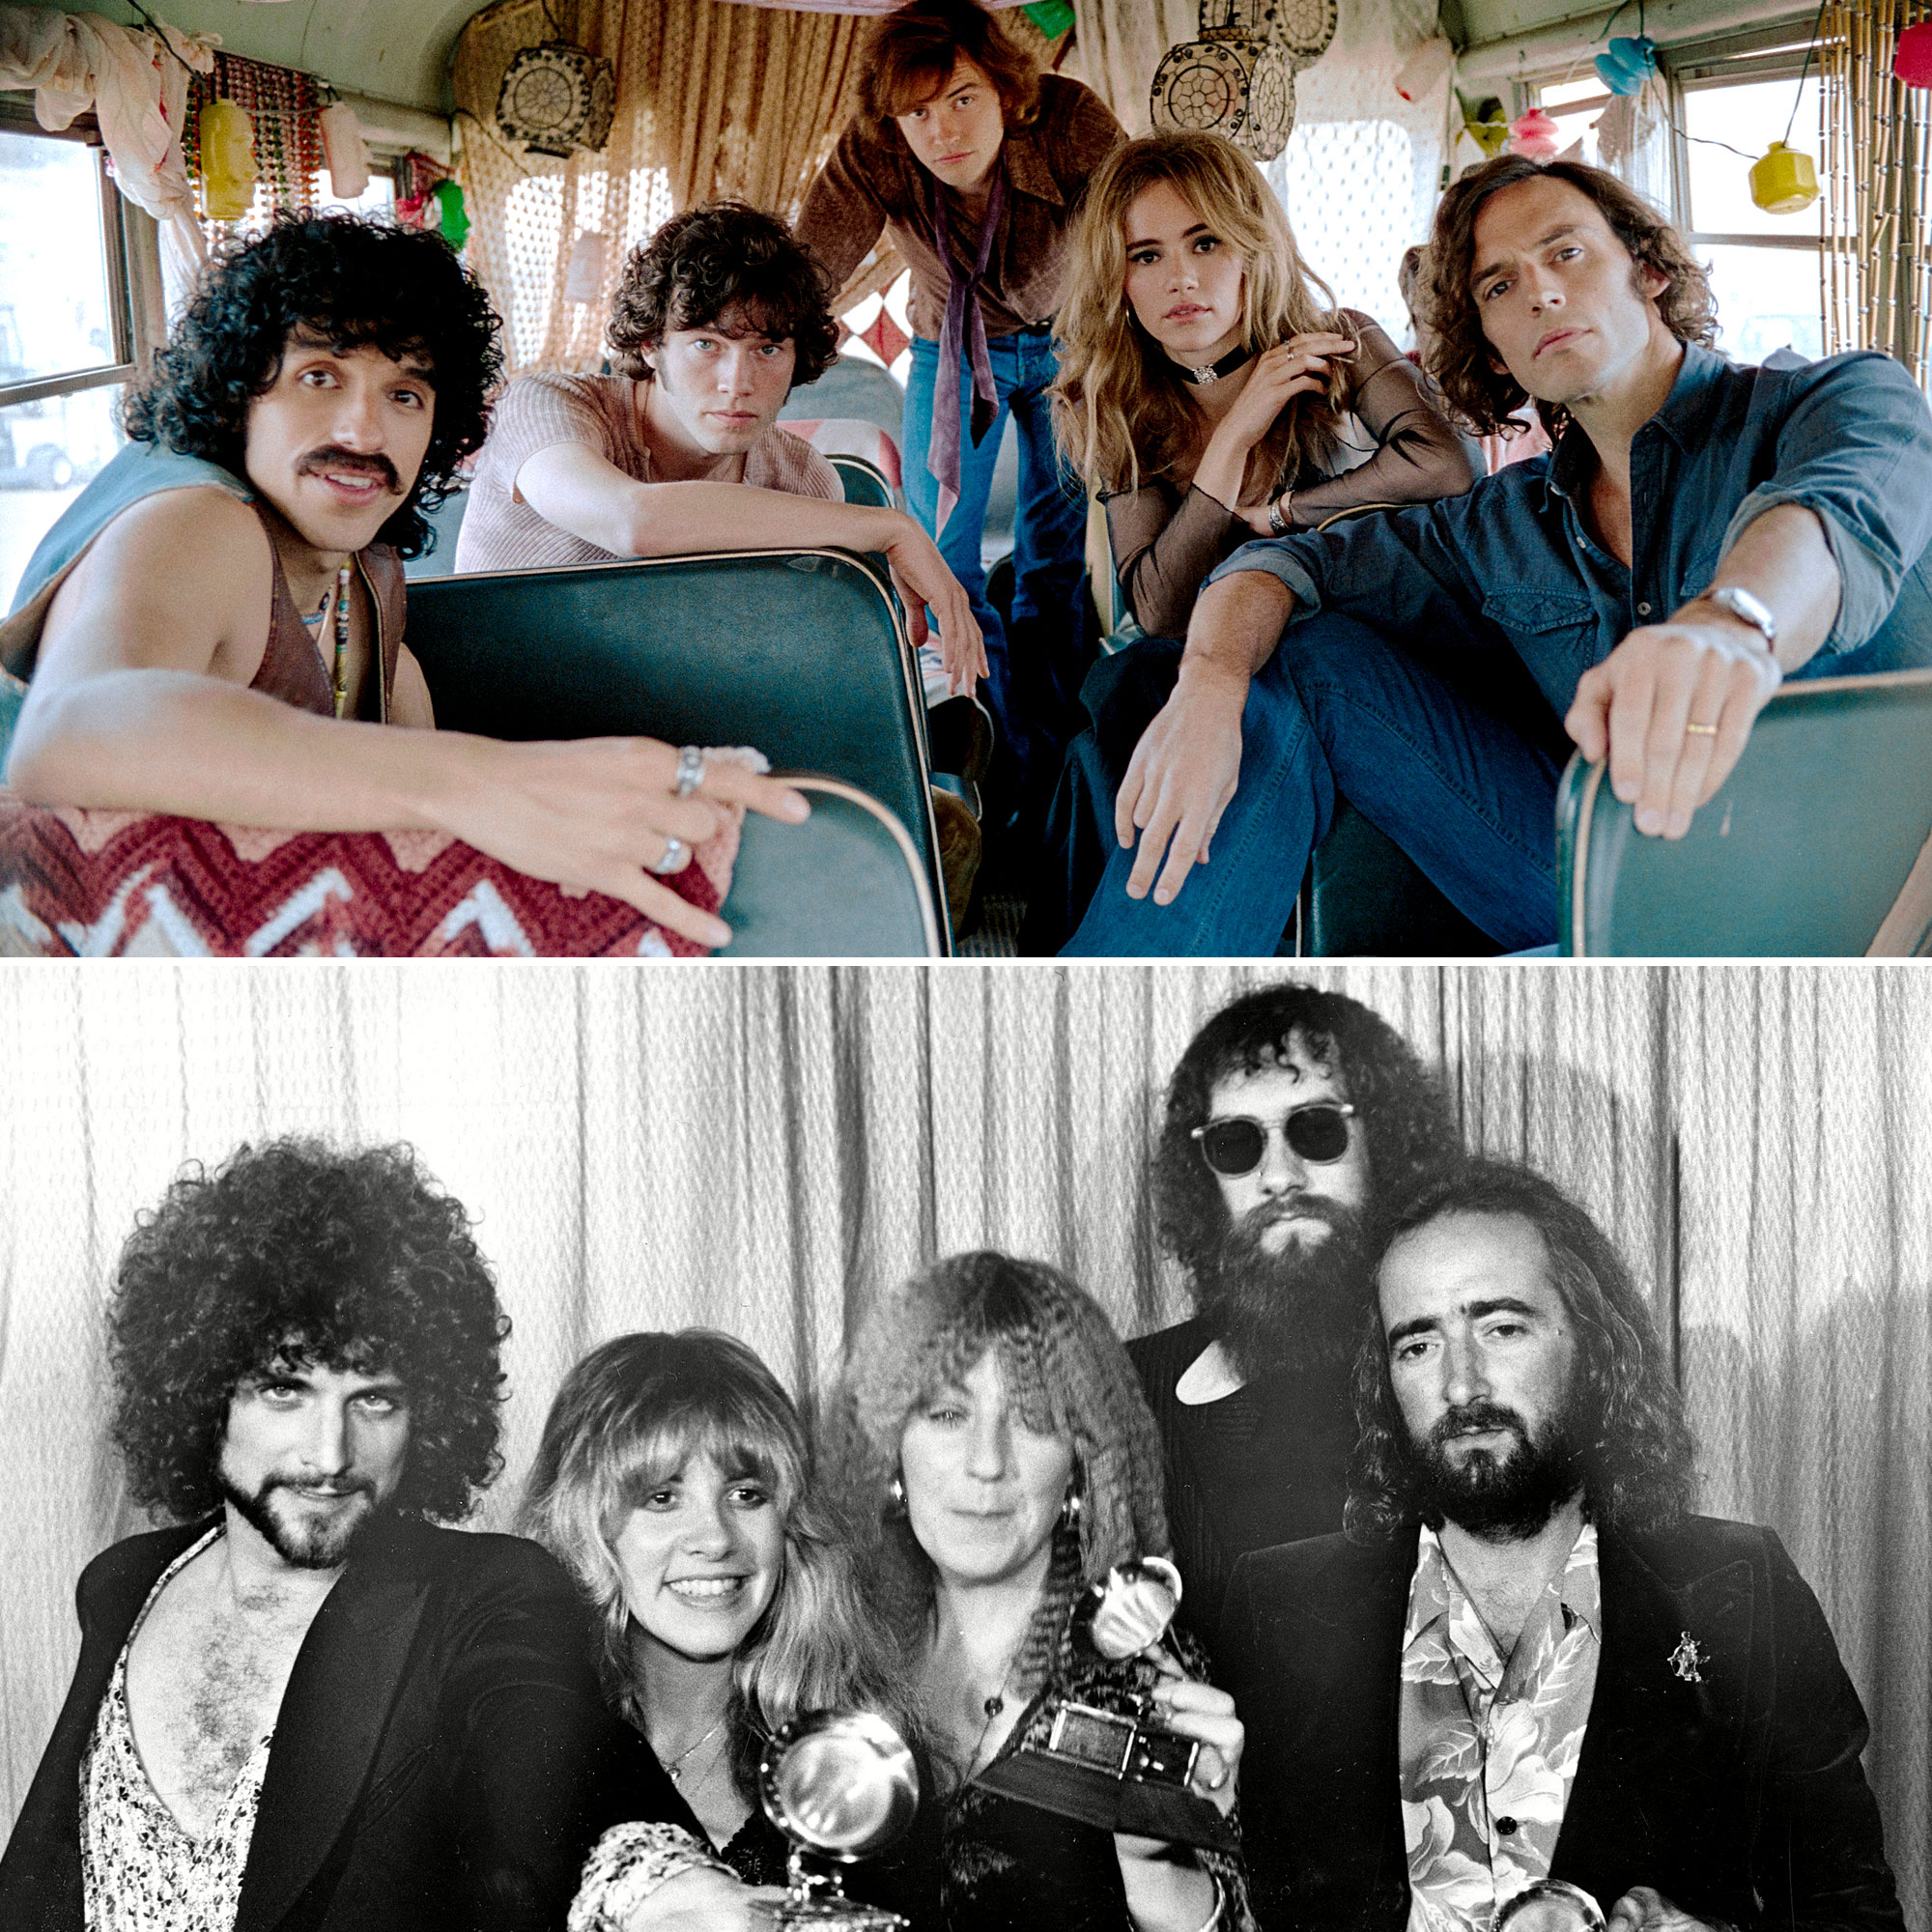 Is Daisy Jones and the Six based in Fleetwood Mac?